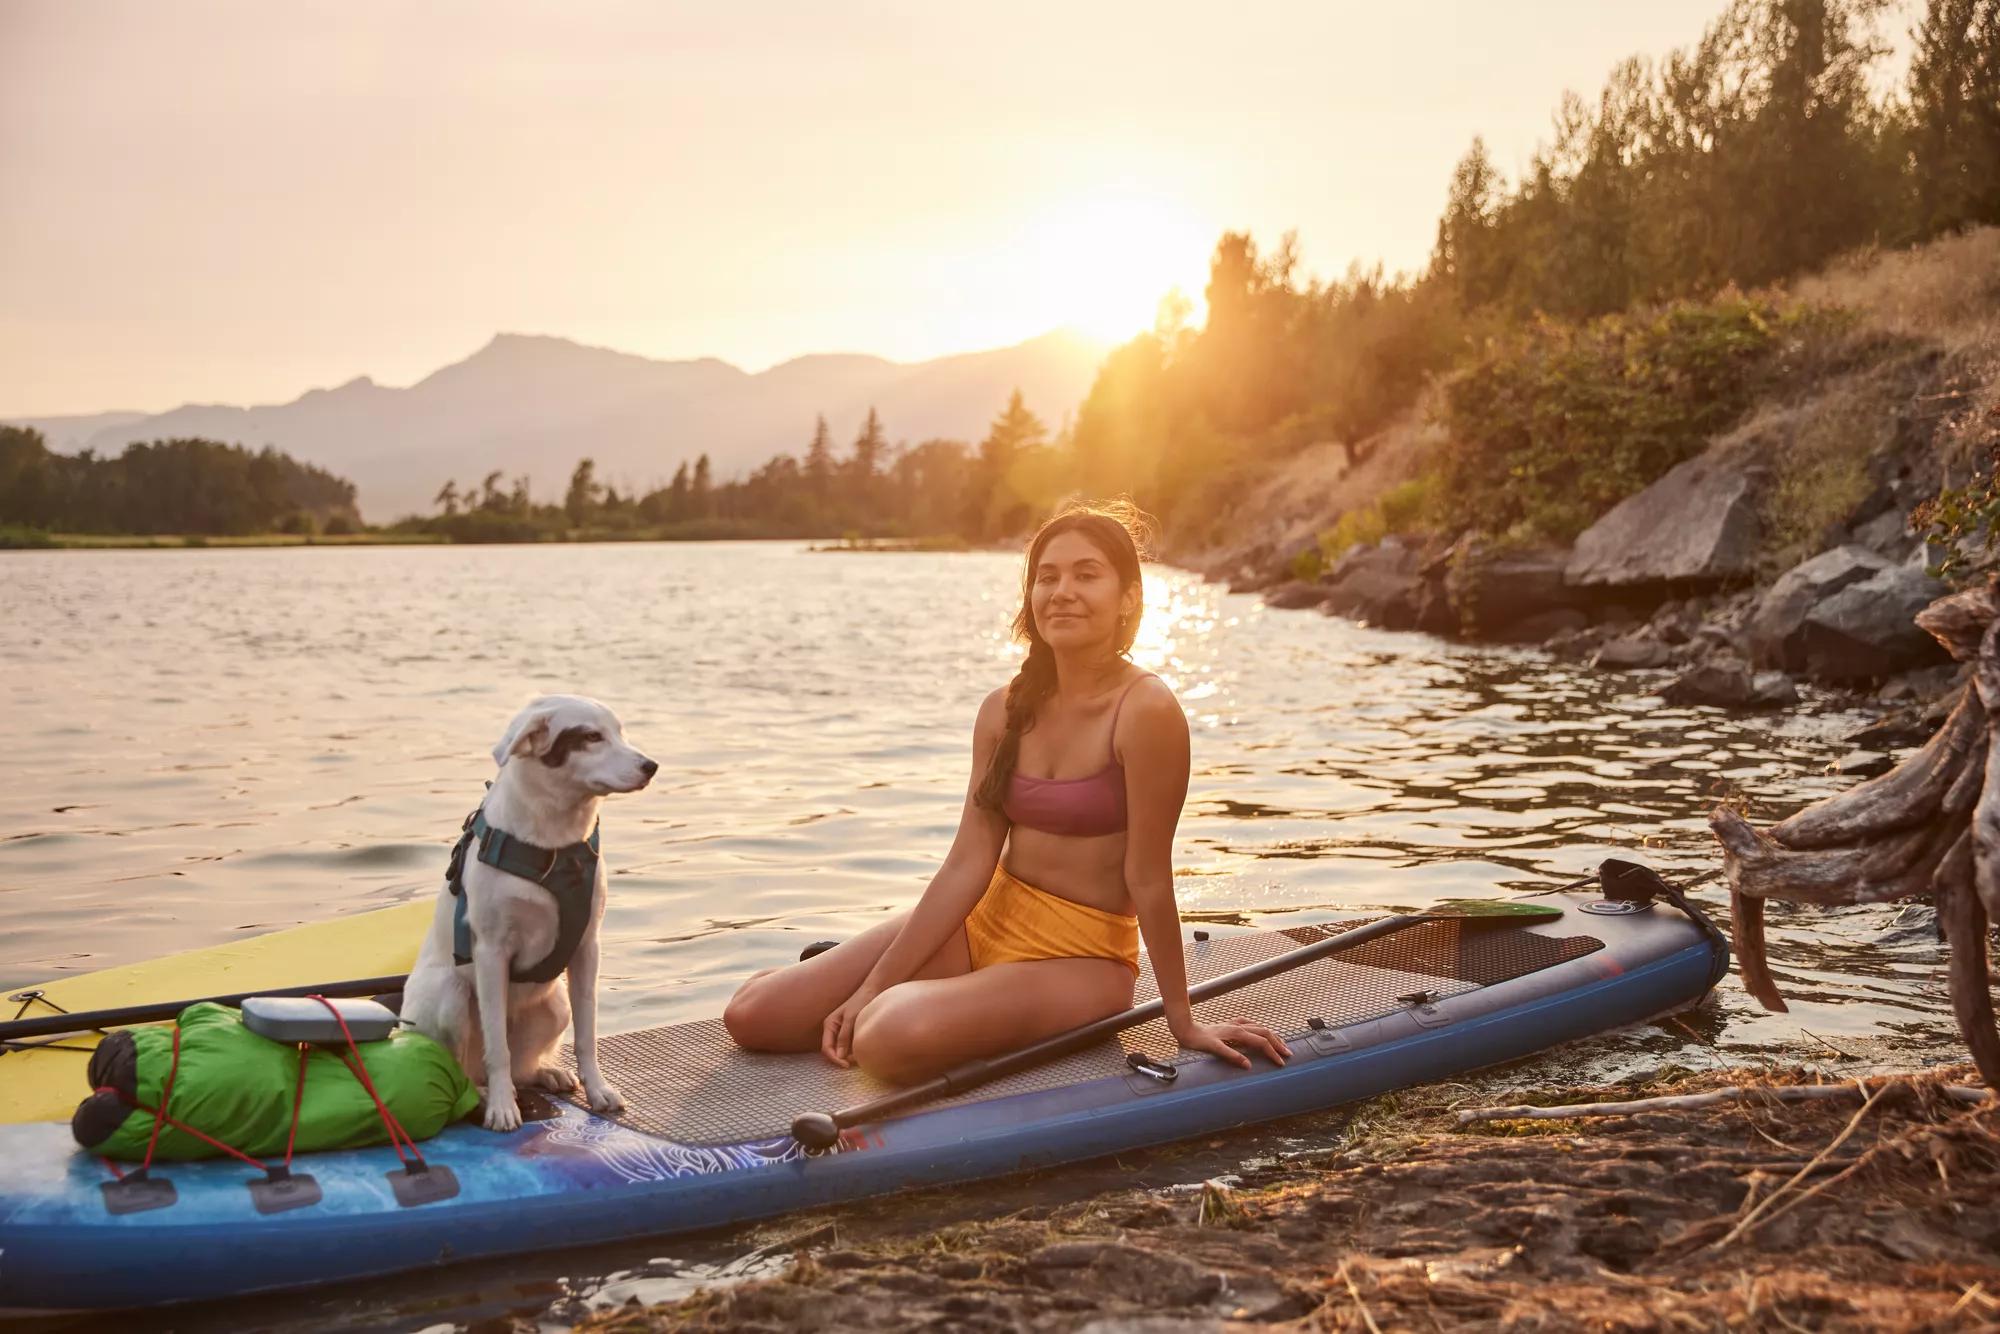 A woman and her dog on a paddleboard by the lakeshore listening to music on a Bose SoundLink Flex portable Bluetooth speaker